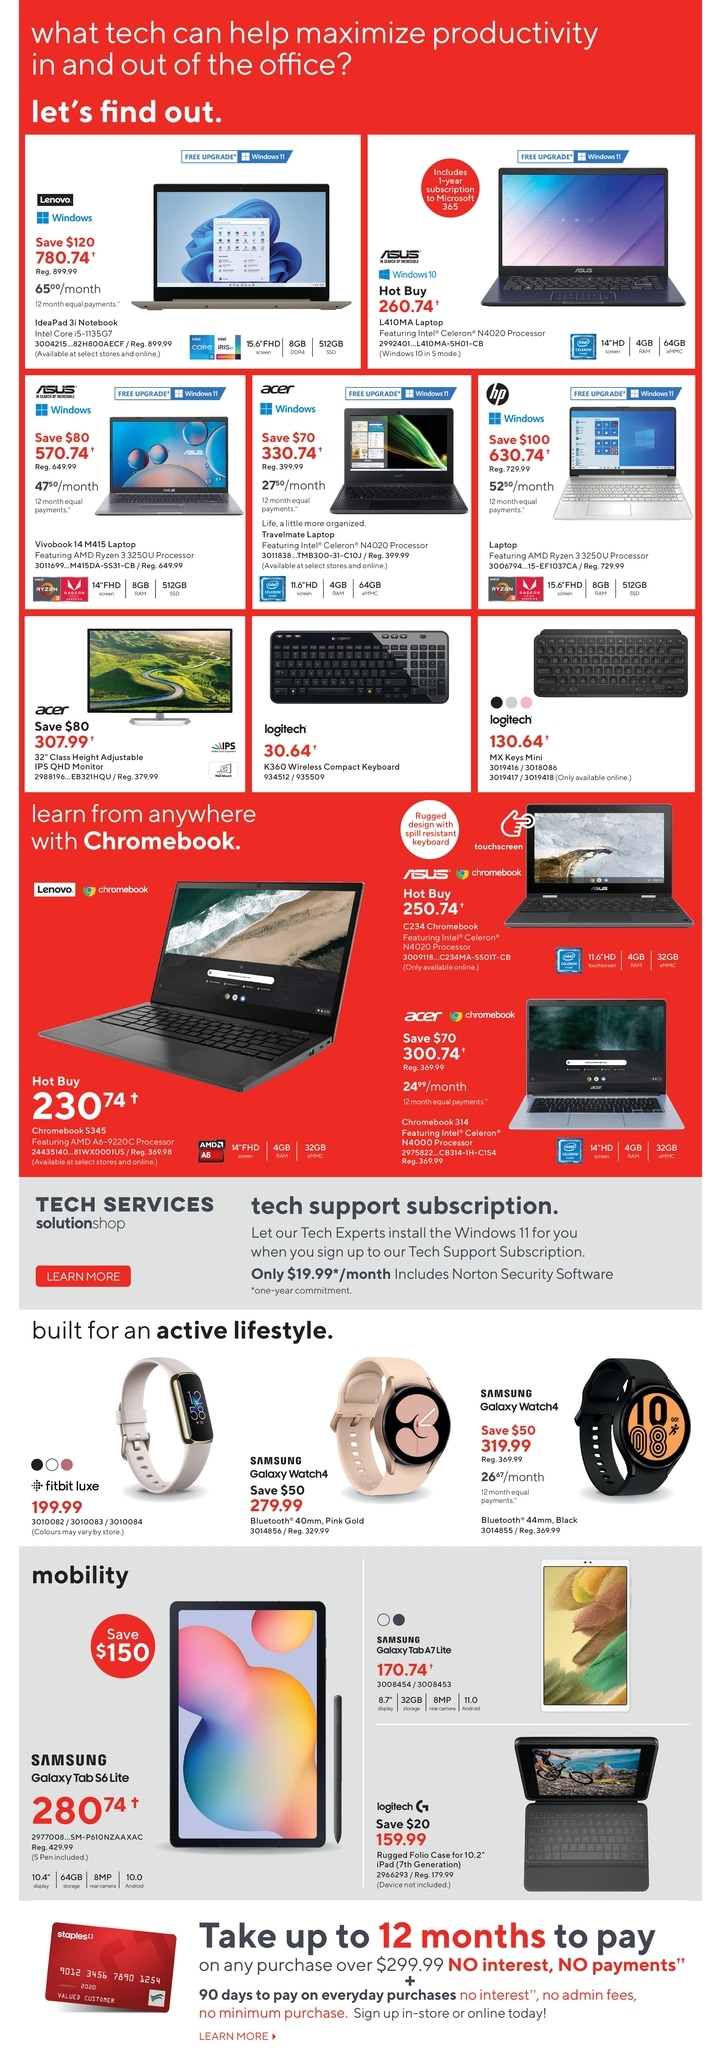 Staples - Weekly Flyer Specials - Page 6